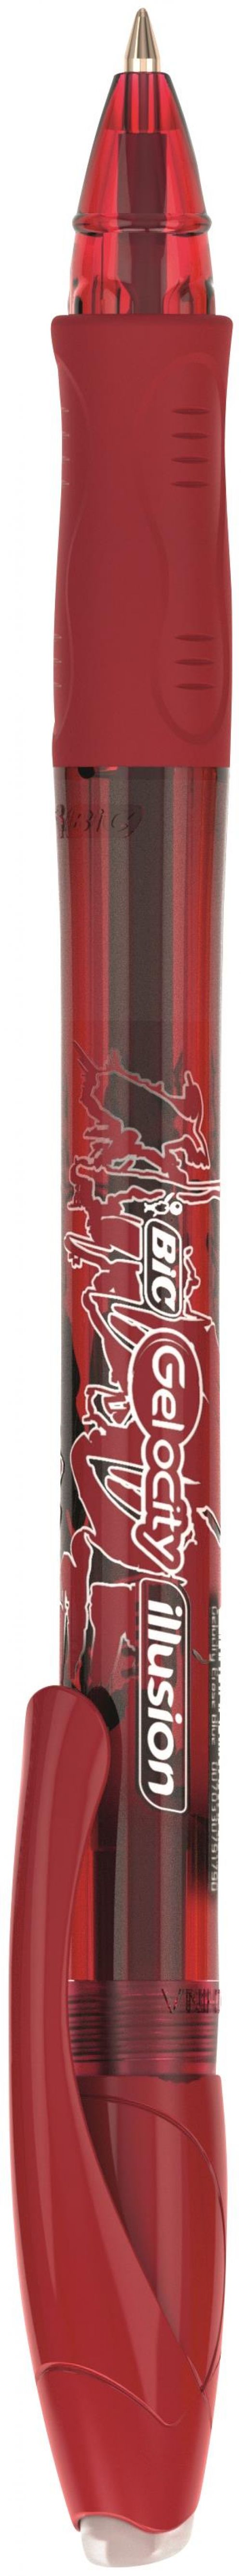 54195BC | BIC Gelocity Illusion is a medium point, red ink, erasable gel pen which employs thermosensitive technology offering its user the ability to write, erase and re-write. Its translucent barrel features a decorative wrap and a textured rubber grip for comfort. With a line width of 0.3mm the BIC Gelocity Illusion is a versatile pen ready to use at home, on the move or in the office. 